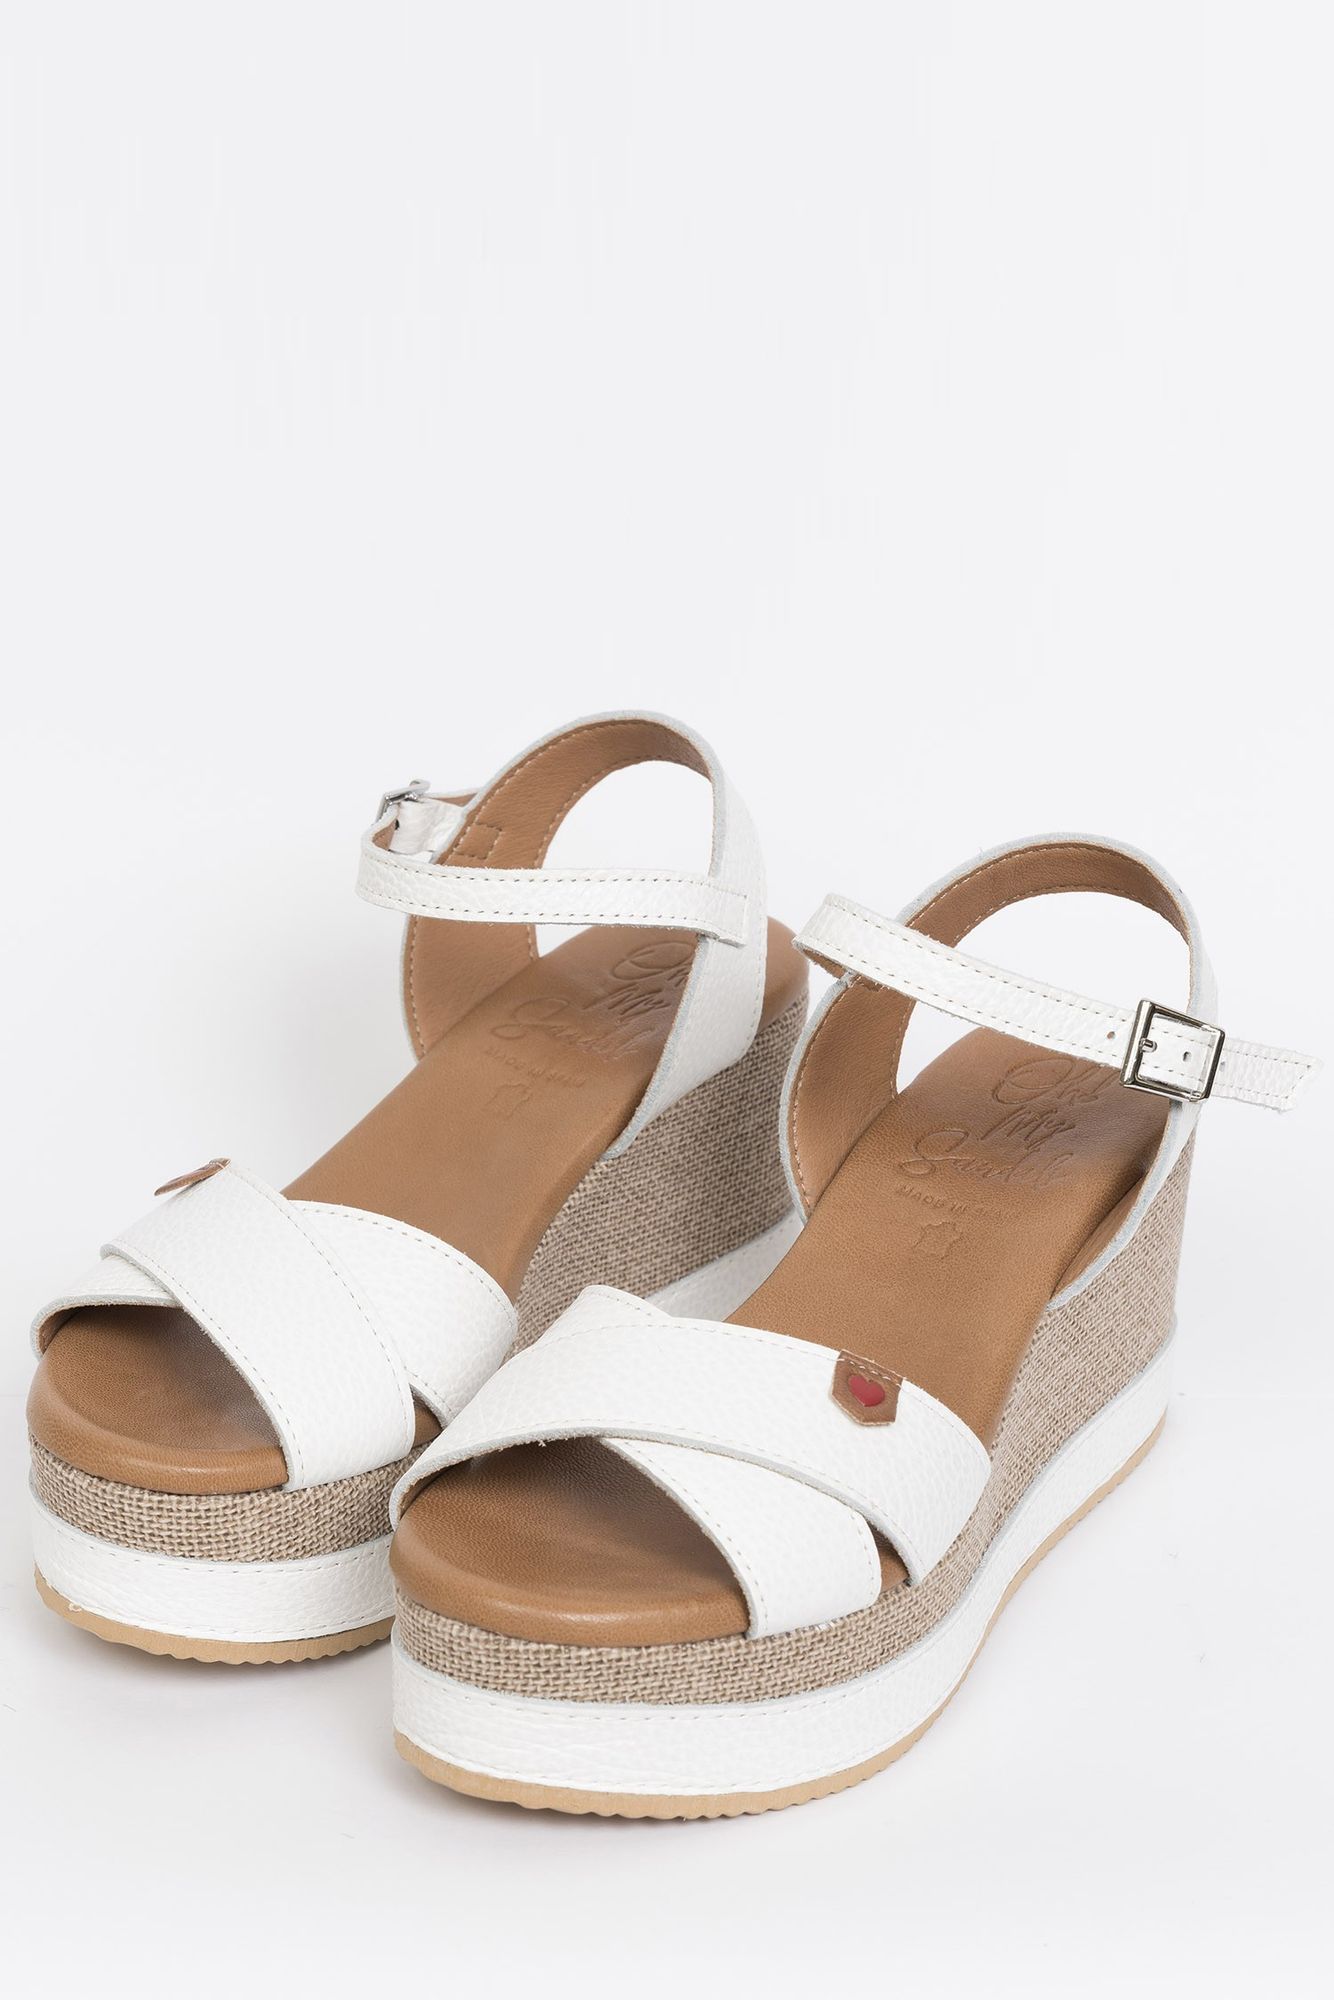 Oh my Sandals 5249 Blanco